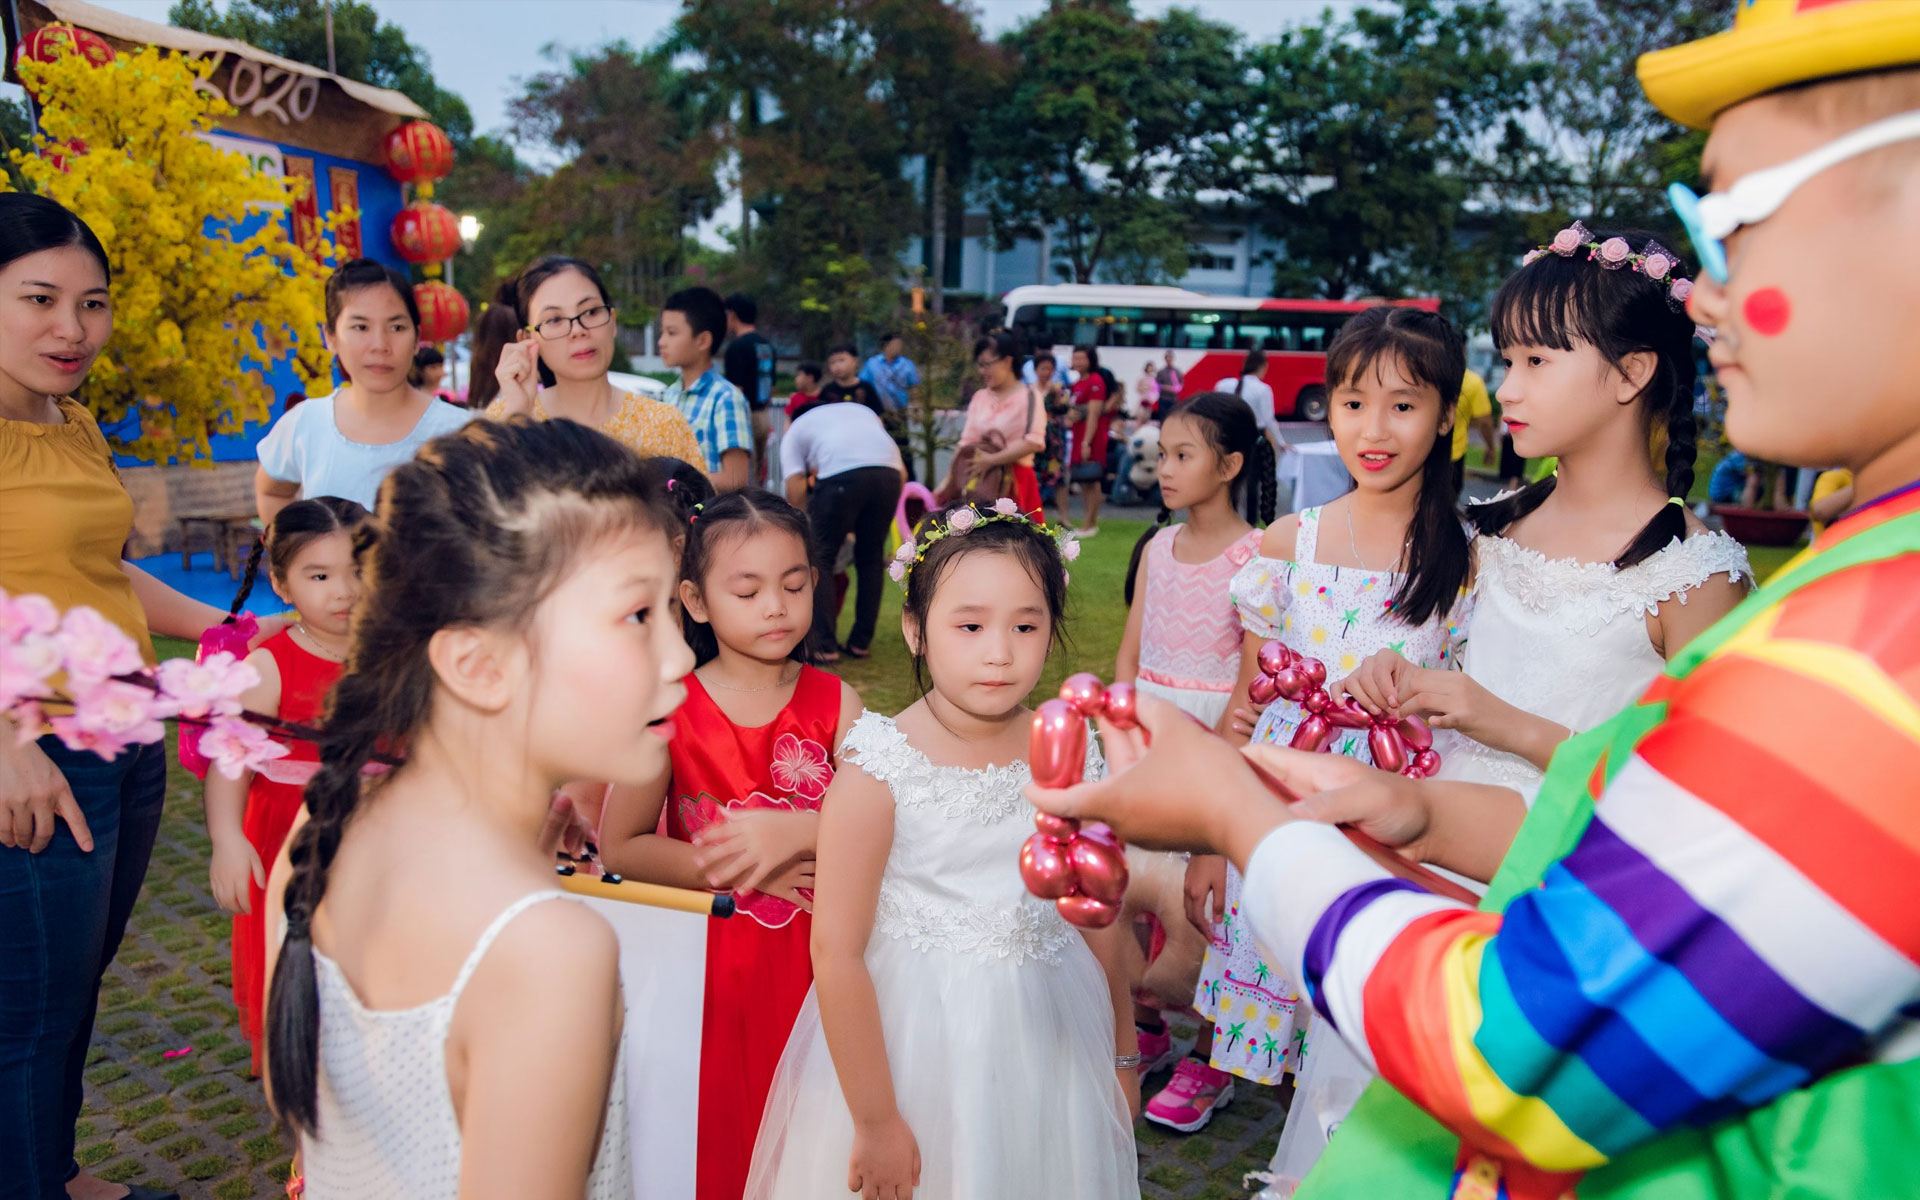 Parents often spend time to go out with kids or organize a small party on Children's Day